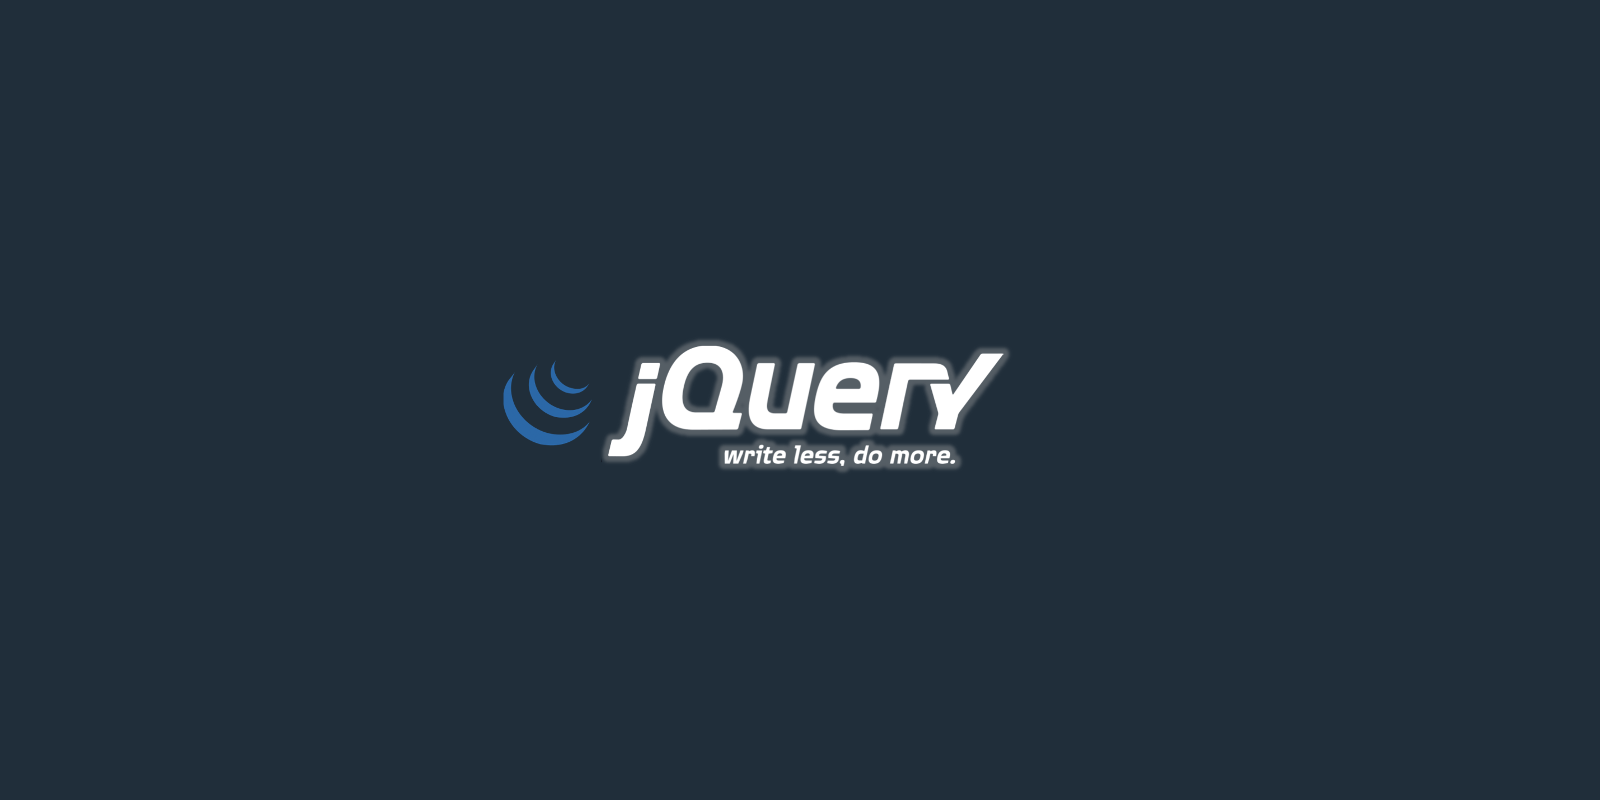 Fake jQuery files infect WordPress sites with malware